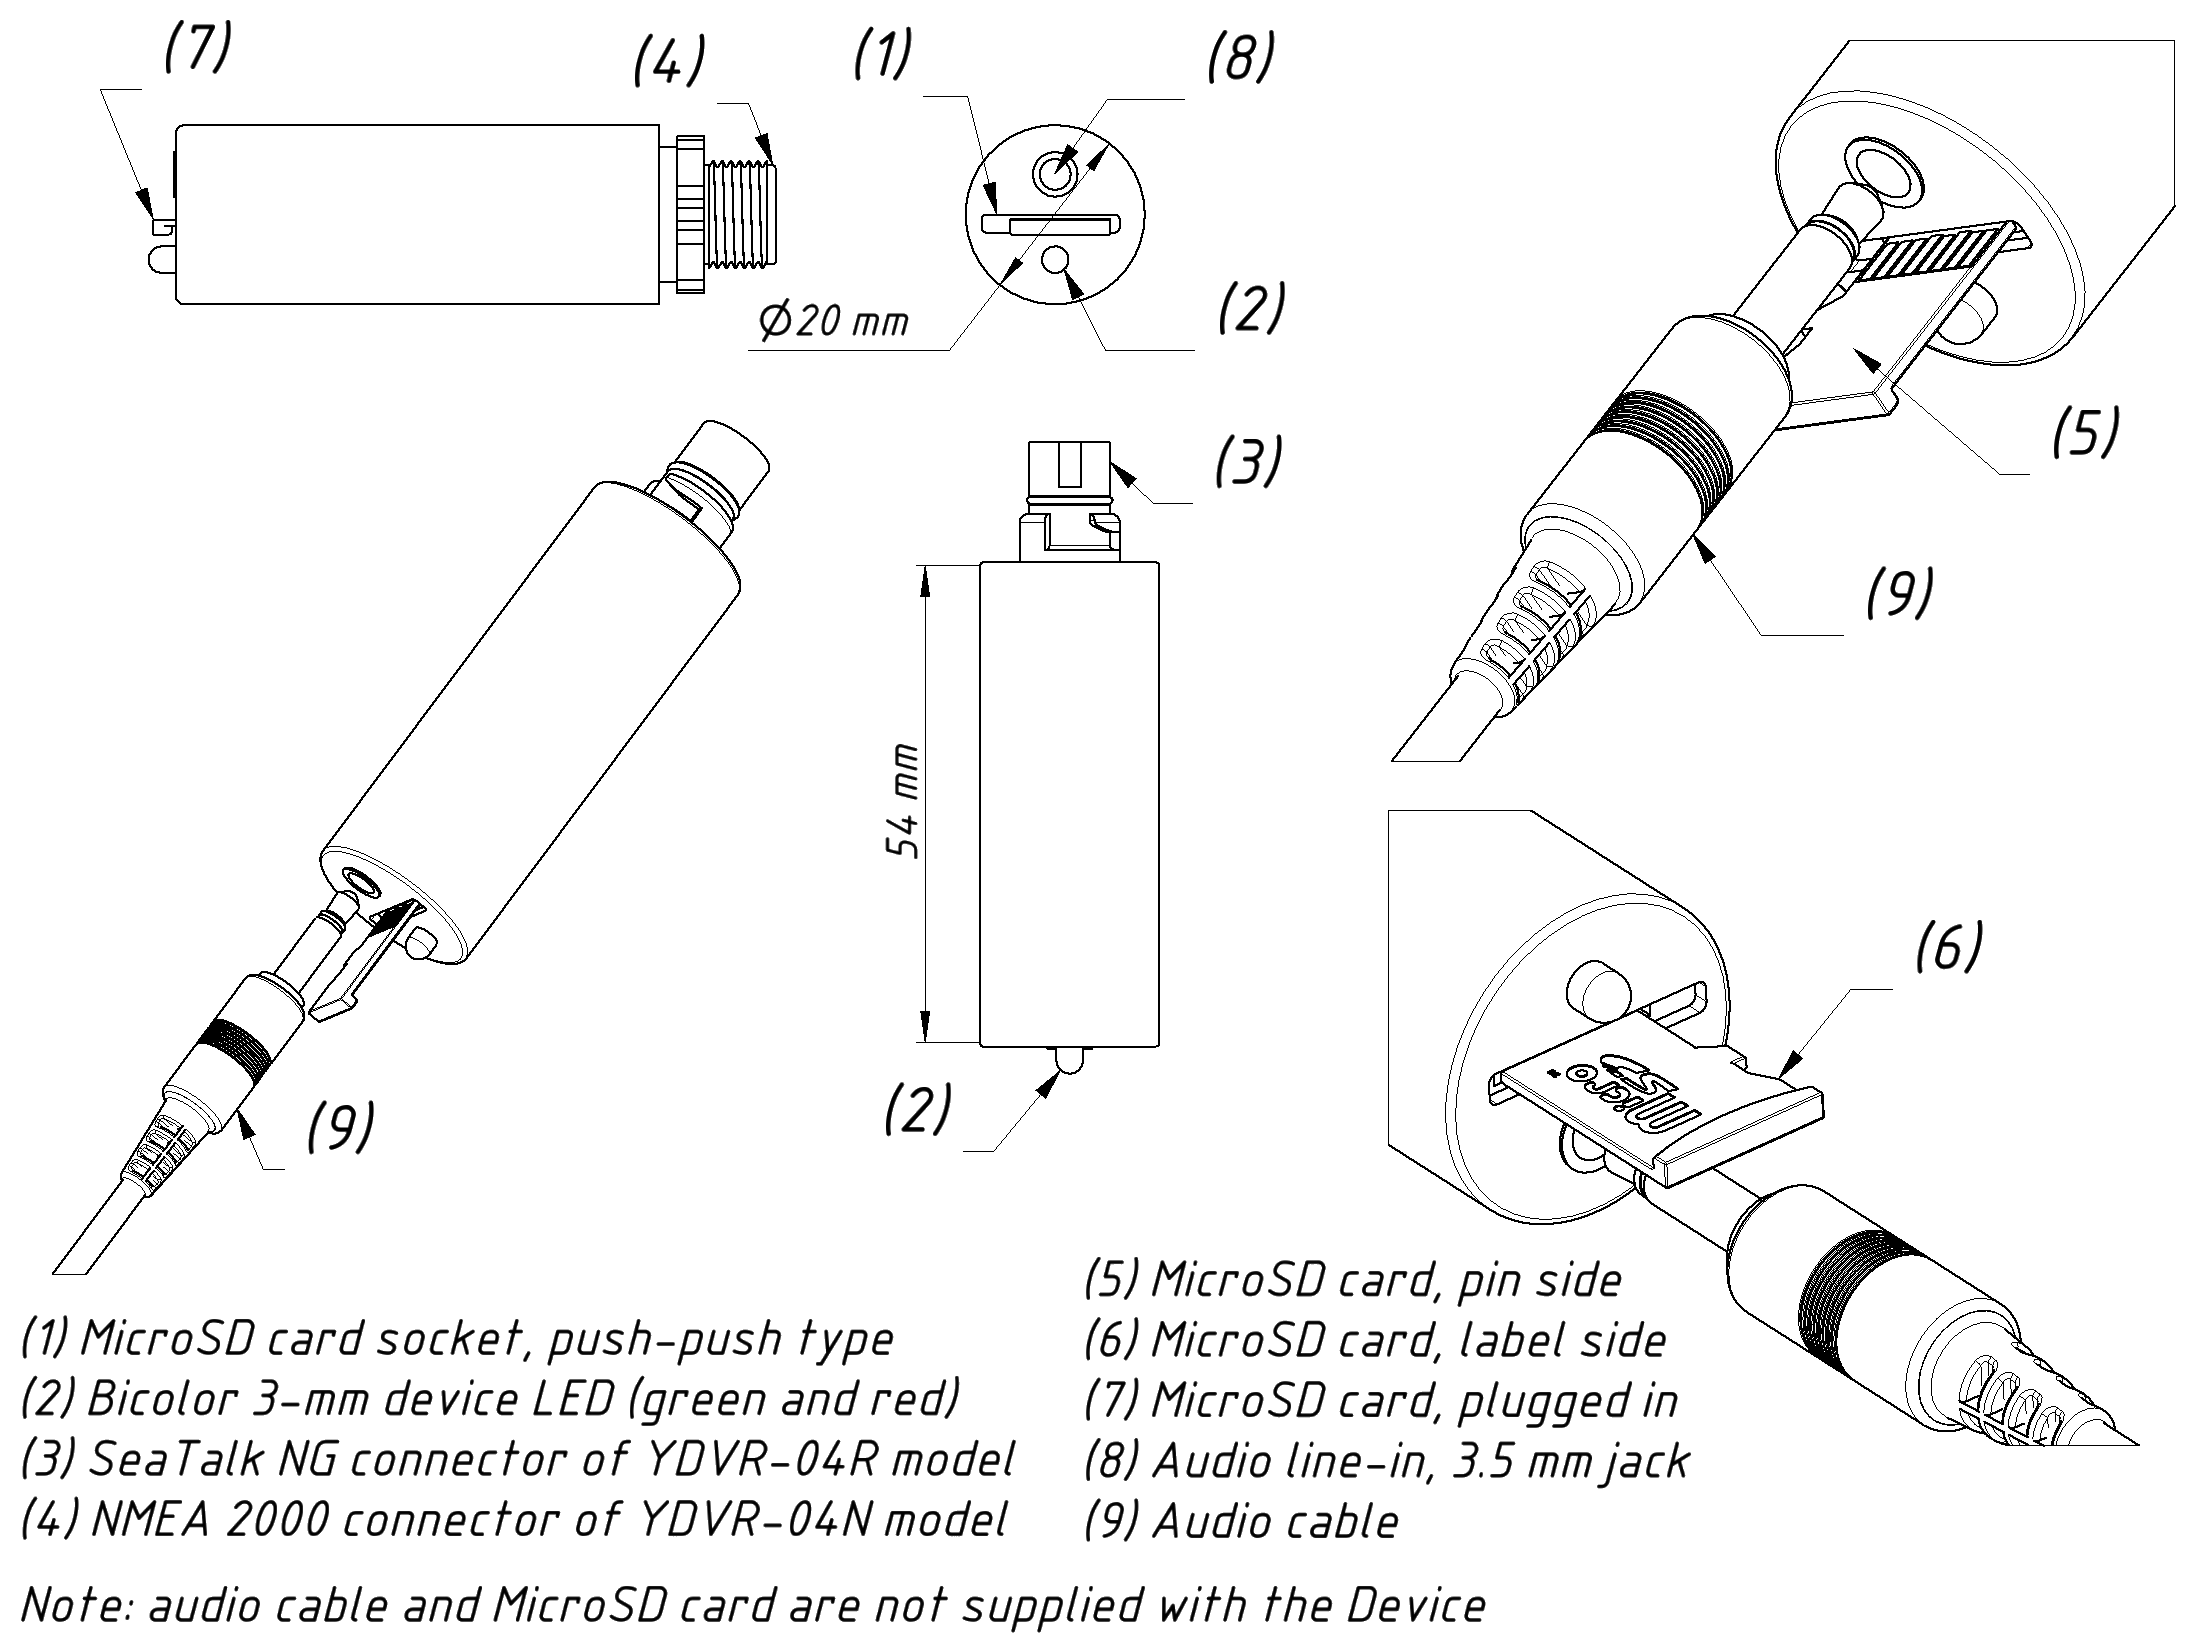 Drawing of the Voyage Recorder YDVR-04